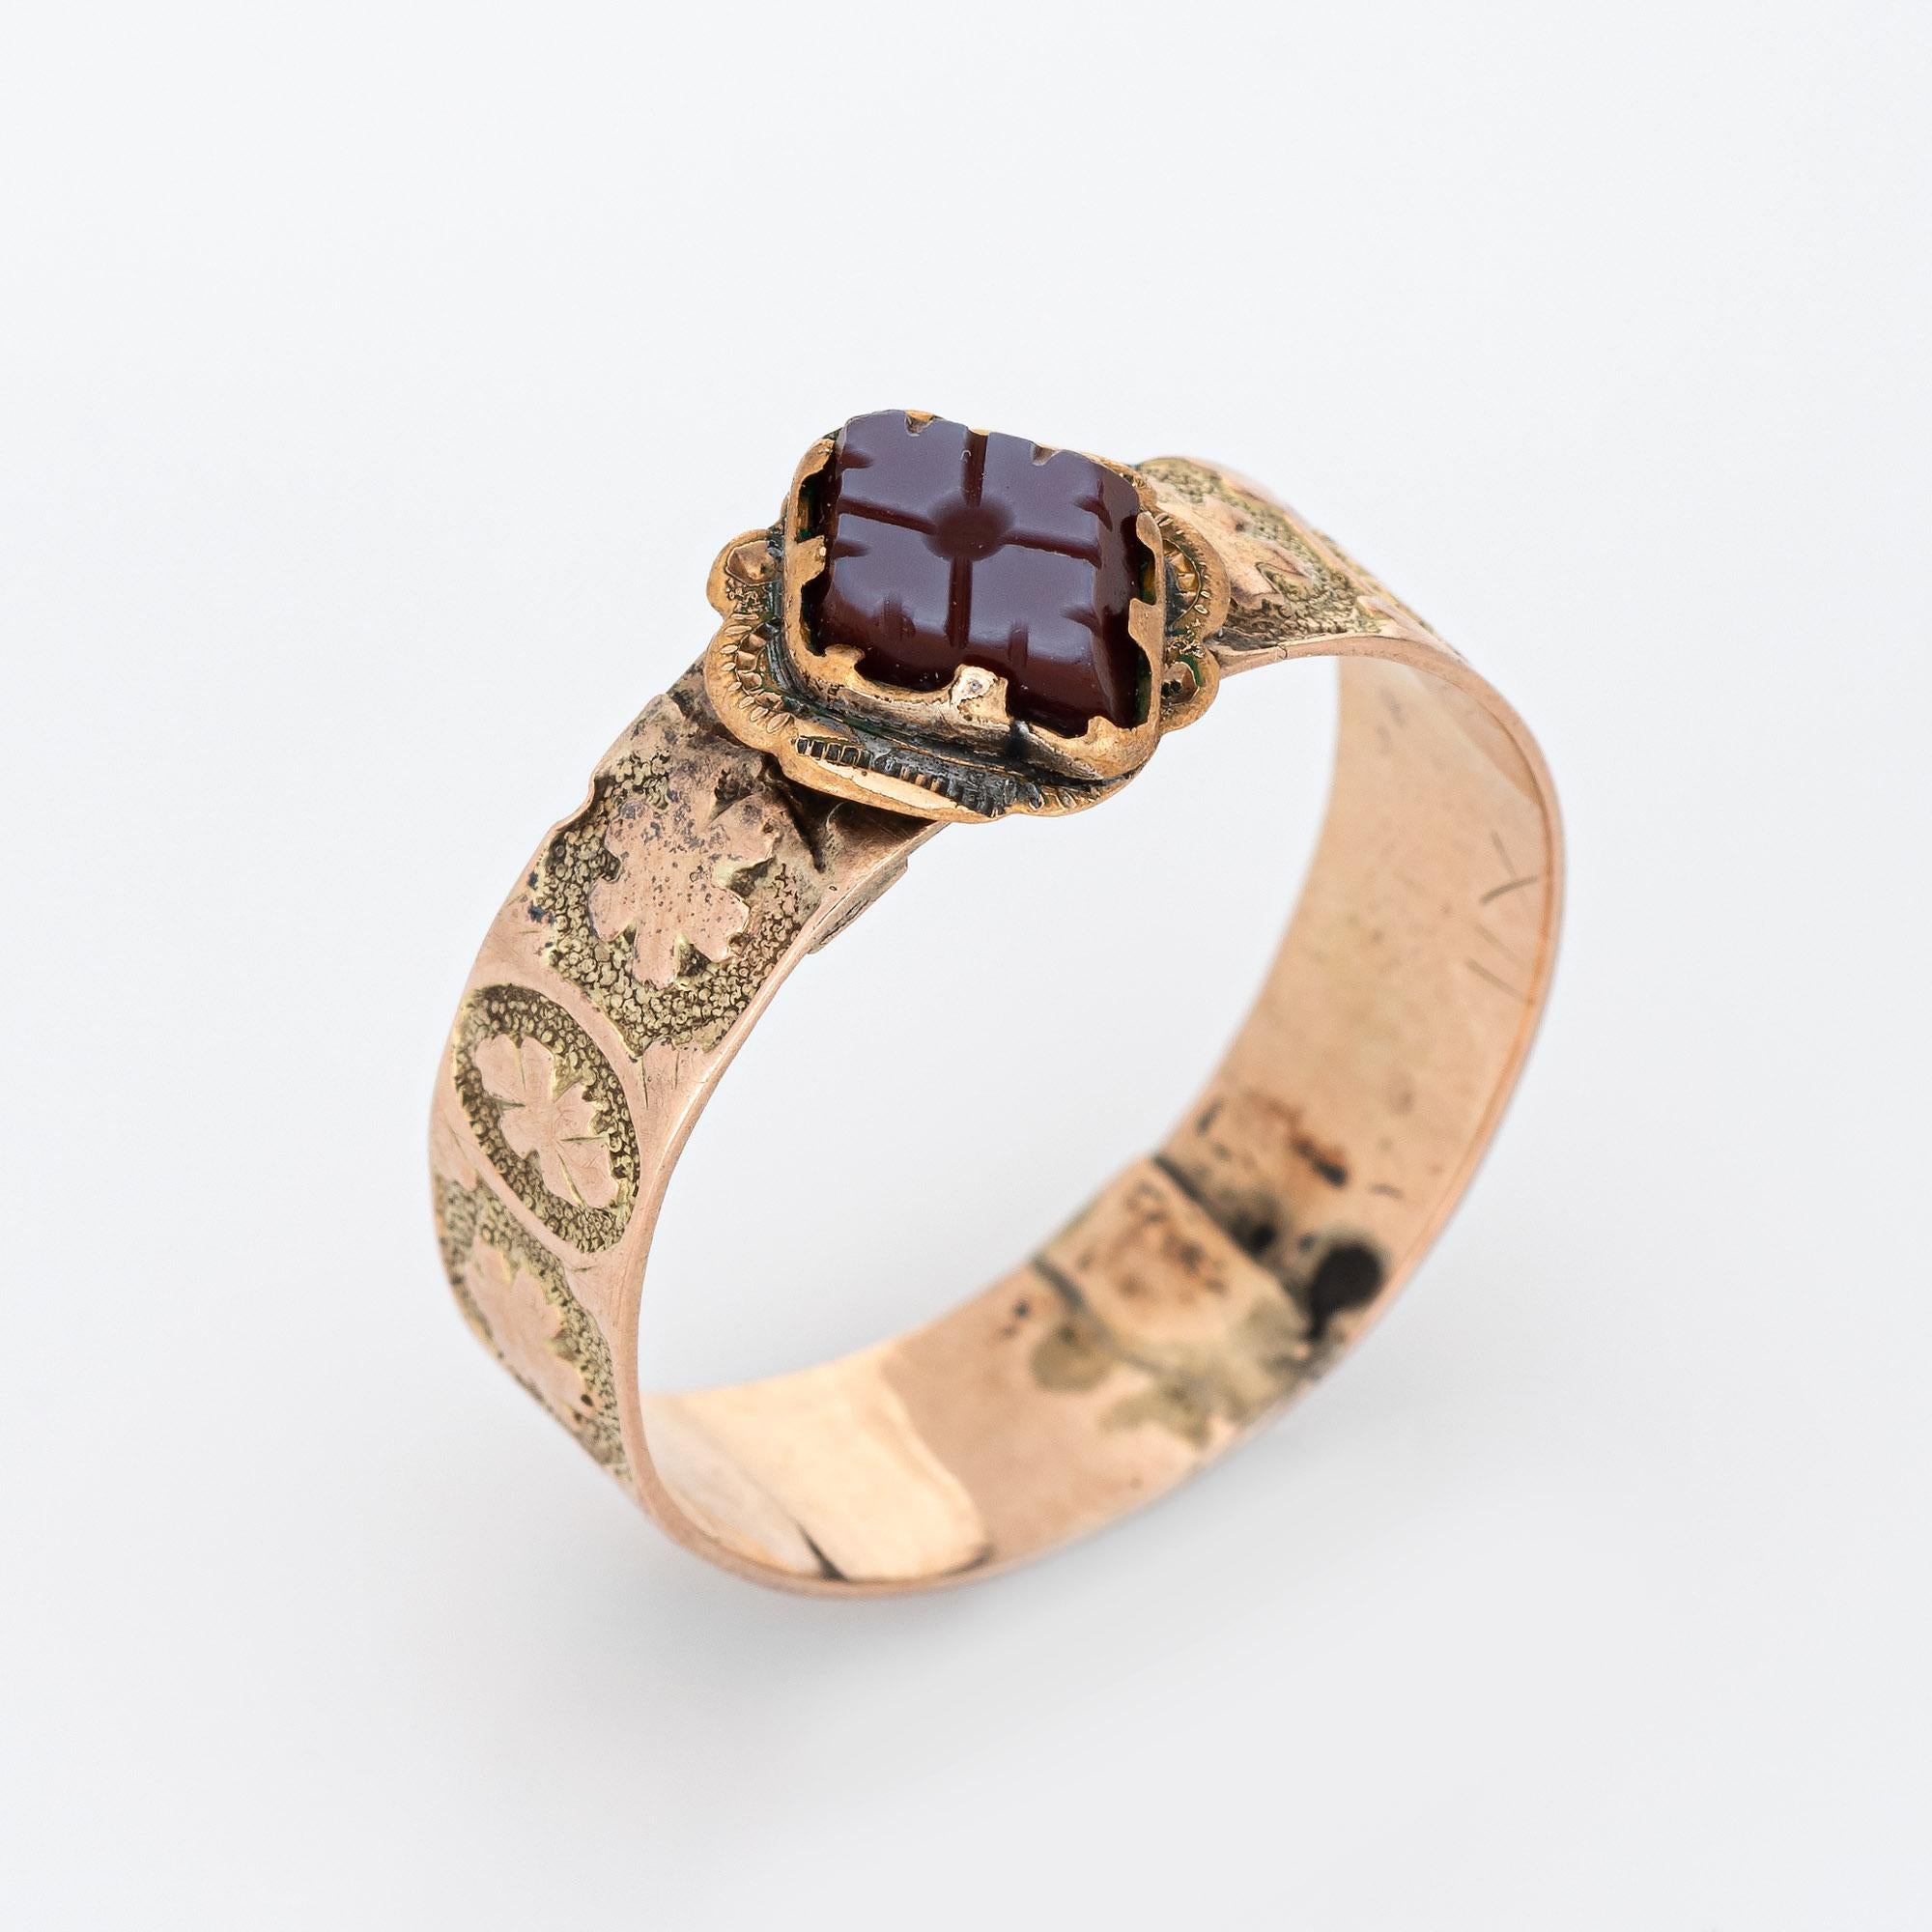 Finely detailed antique Victorian agate band (circa 1880s to 1900s) crafted in 10 karat rose gold. 

Carved agate measures 8mm x 6mm (in very good condition and free of cracks or chips). 

The sweet band features center set agate, carved in a floral